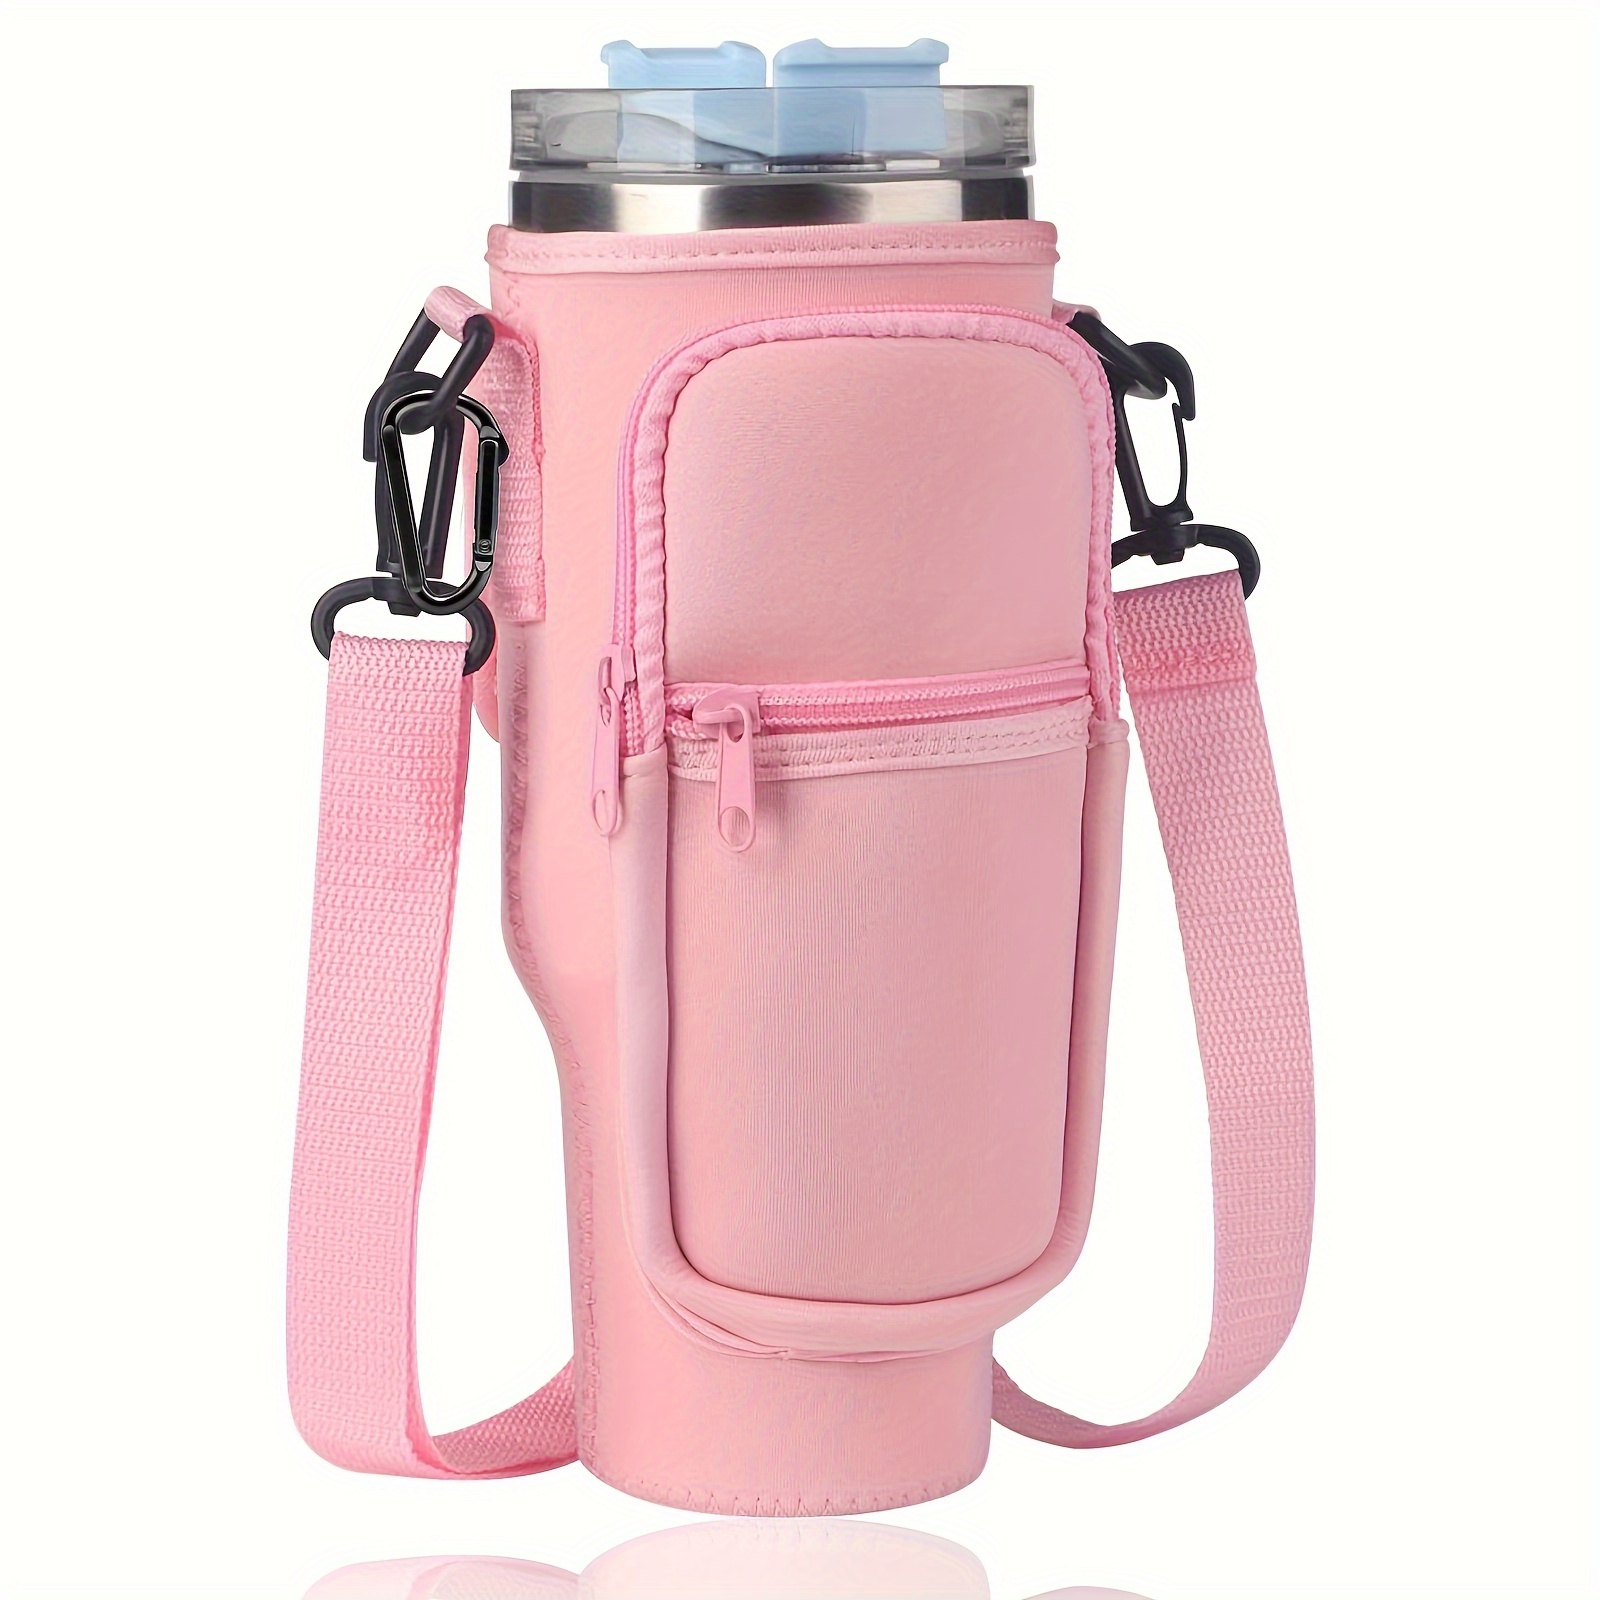  HUIACONG Astronaut Girl Water Bottle Carrier Bag with